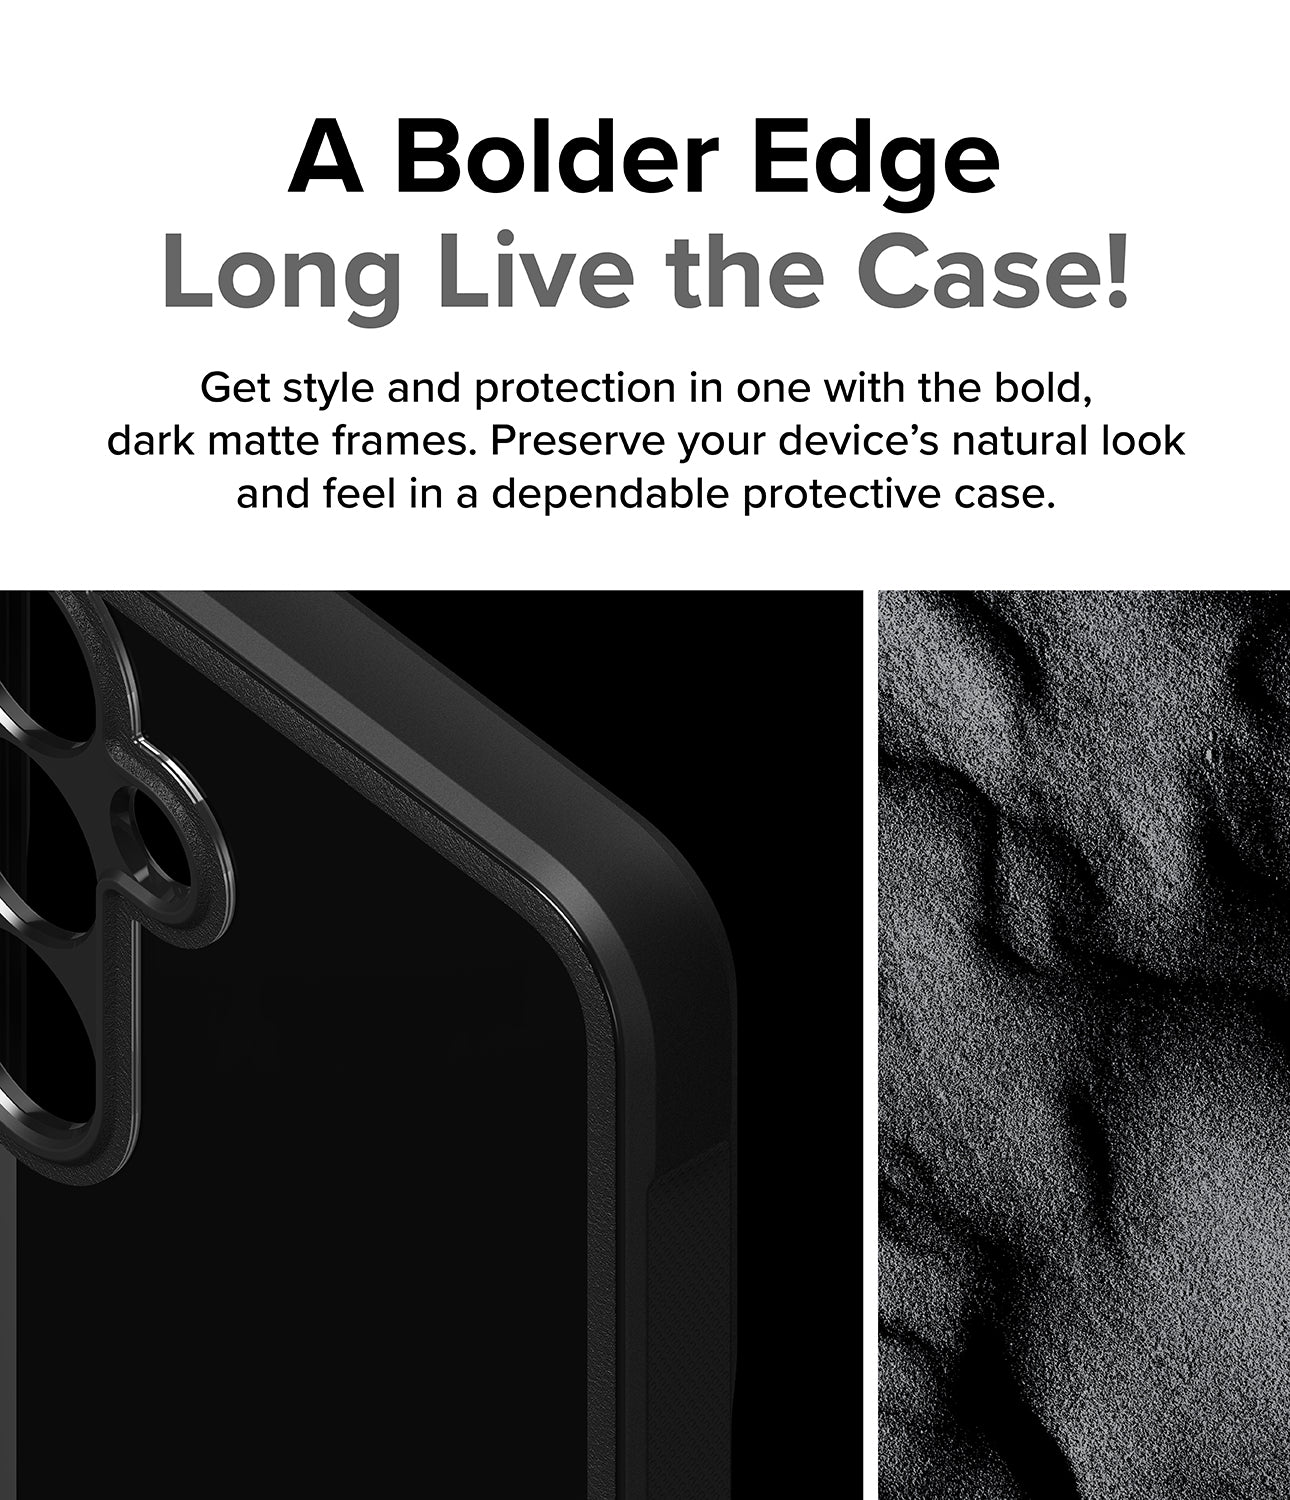 Galaxy S24 Plus Case | Fusion Bold - A Bolder Edge Long Live the Case! Get style and protection in one with the bold, dark matte frames. Preserve your device's natural look and feel in a dependable protective case.